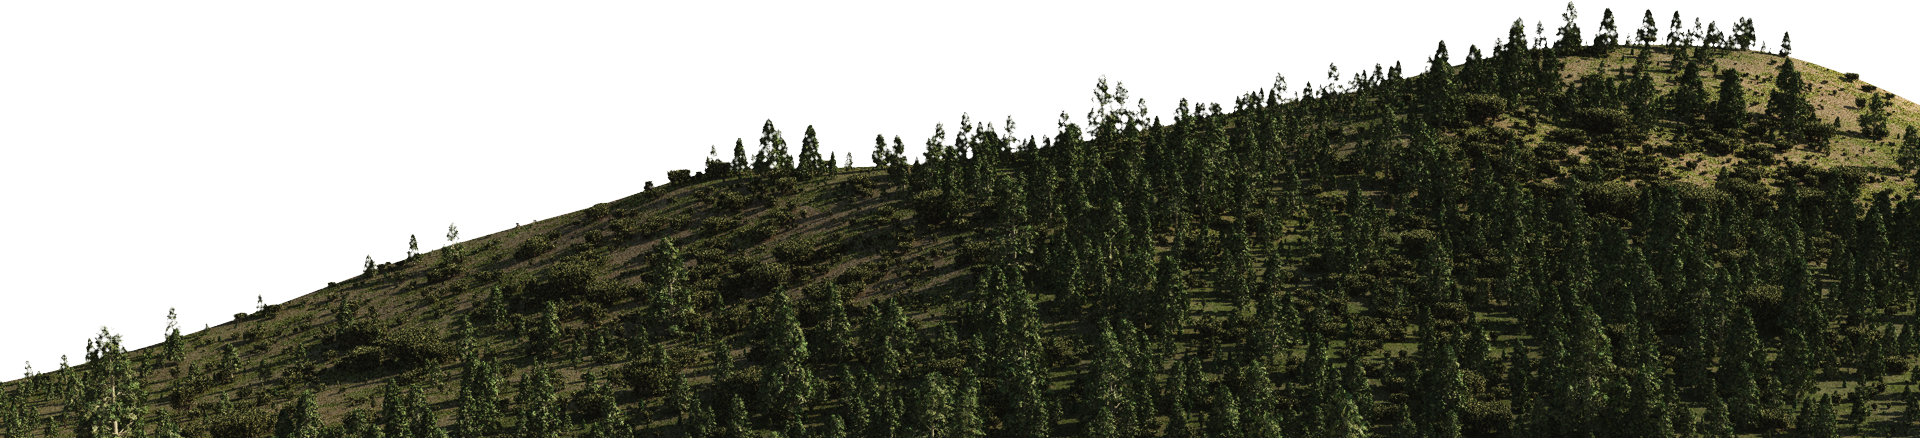 hill clipart mountain forest